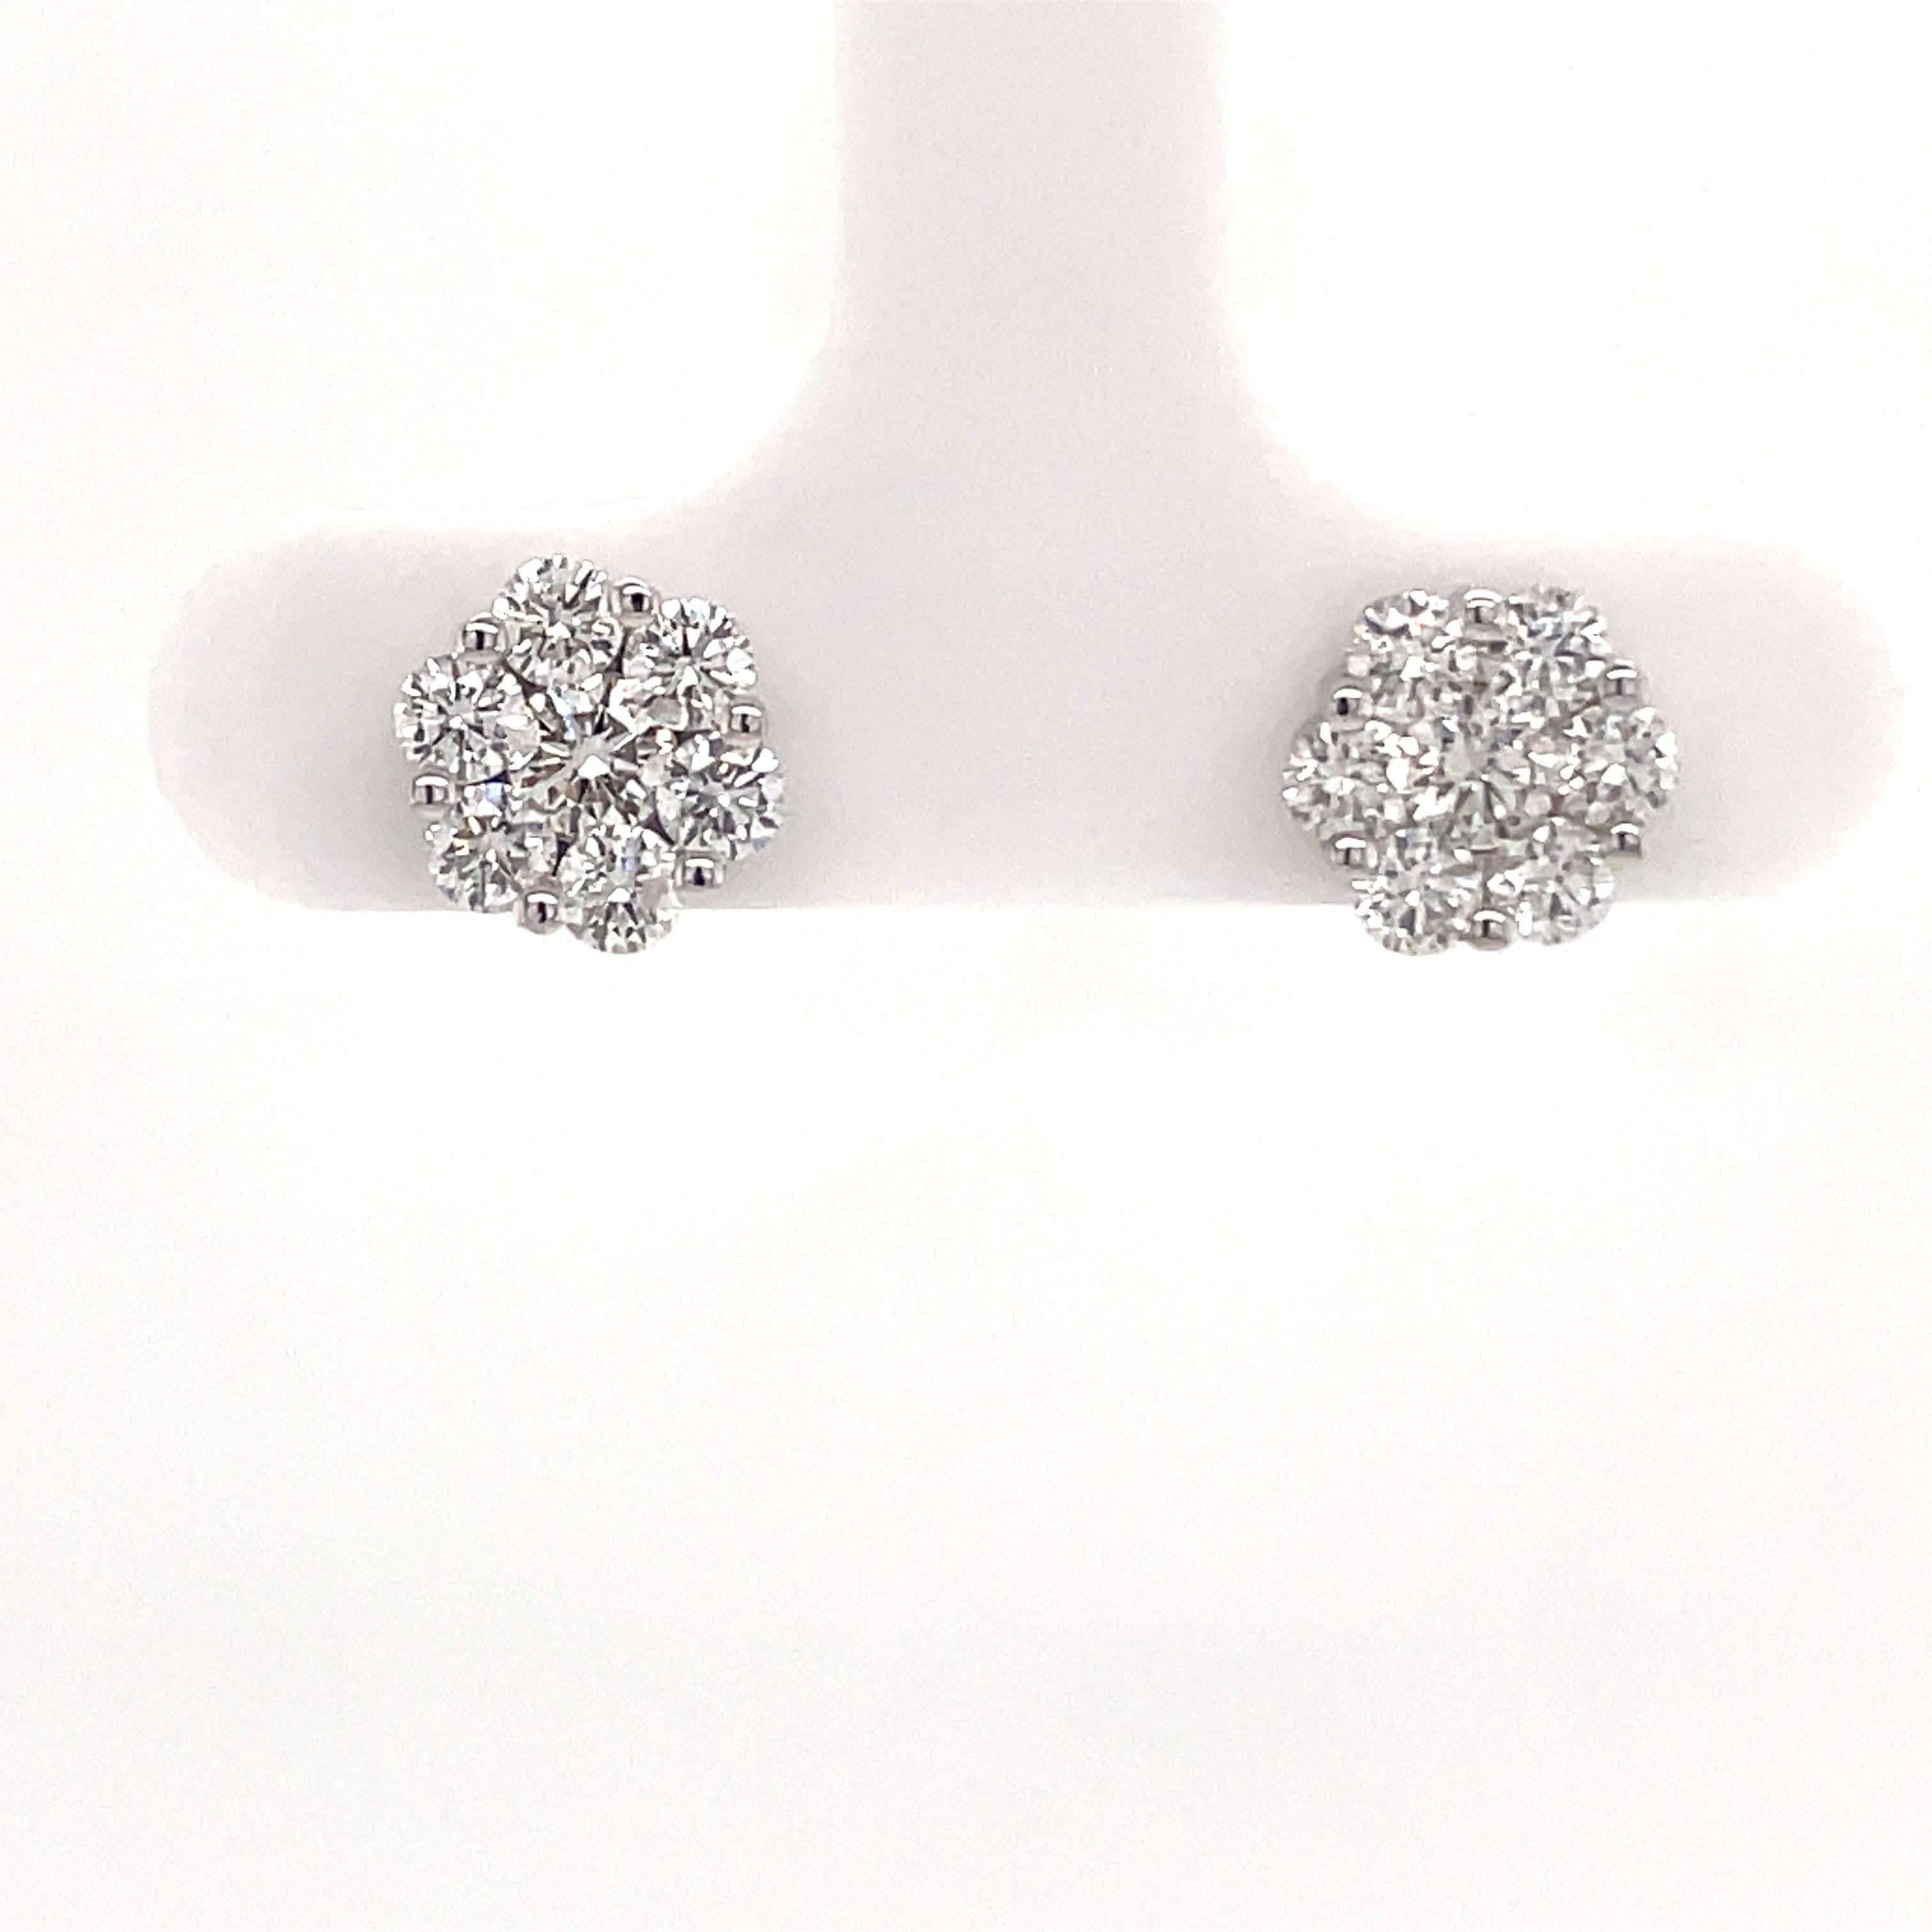 14 Karat White gold cluster earrings featuring 14round brilliants weighing 1.04 carats.
Color G-H
Clarity SI

Available in all sizes and gold color. 